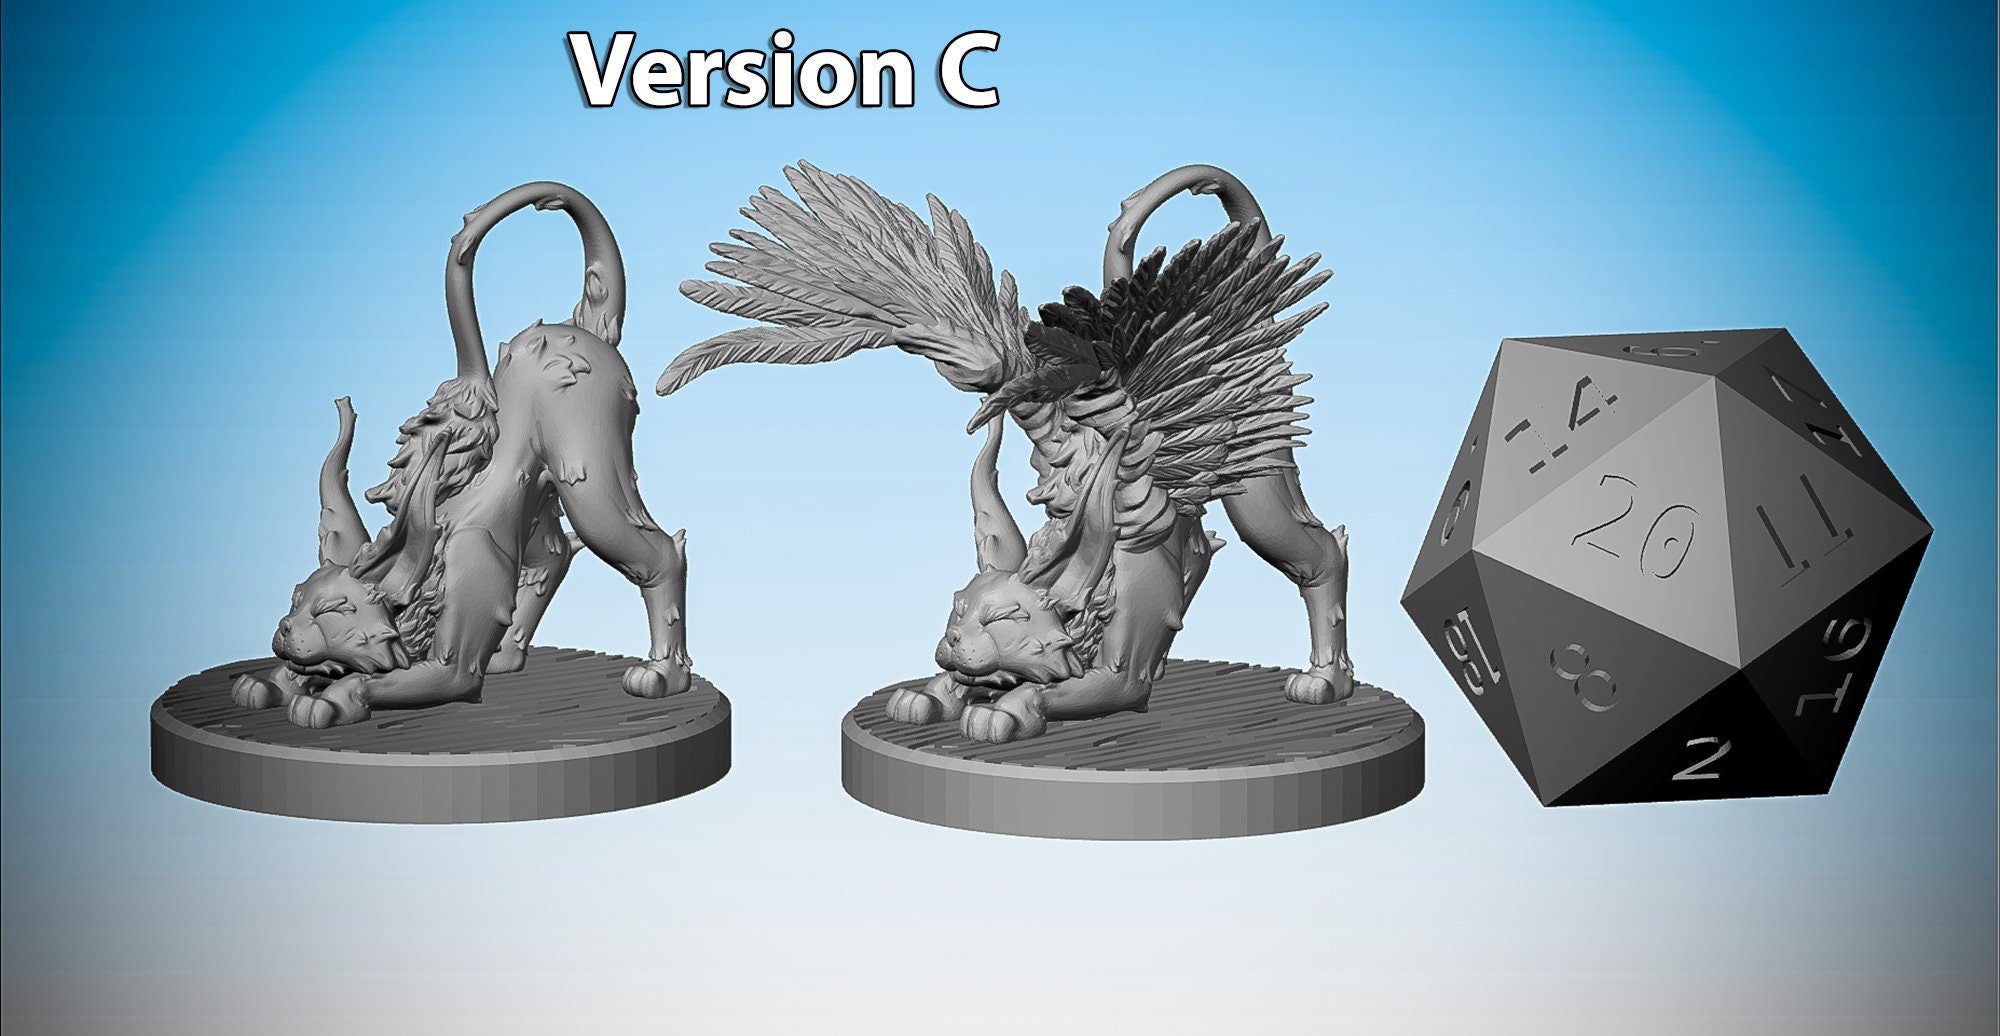 CAT FAMILIAR "Kneazle" (4 versions)-Role Playing Miniatures